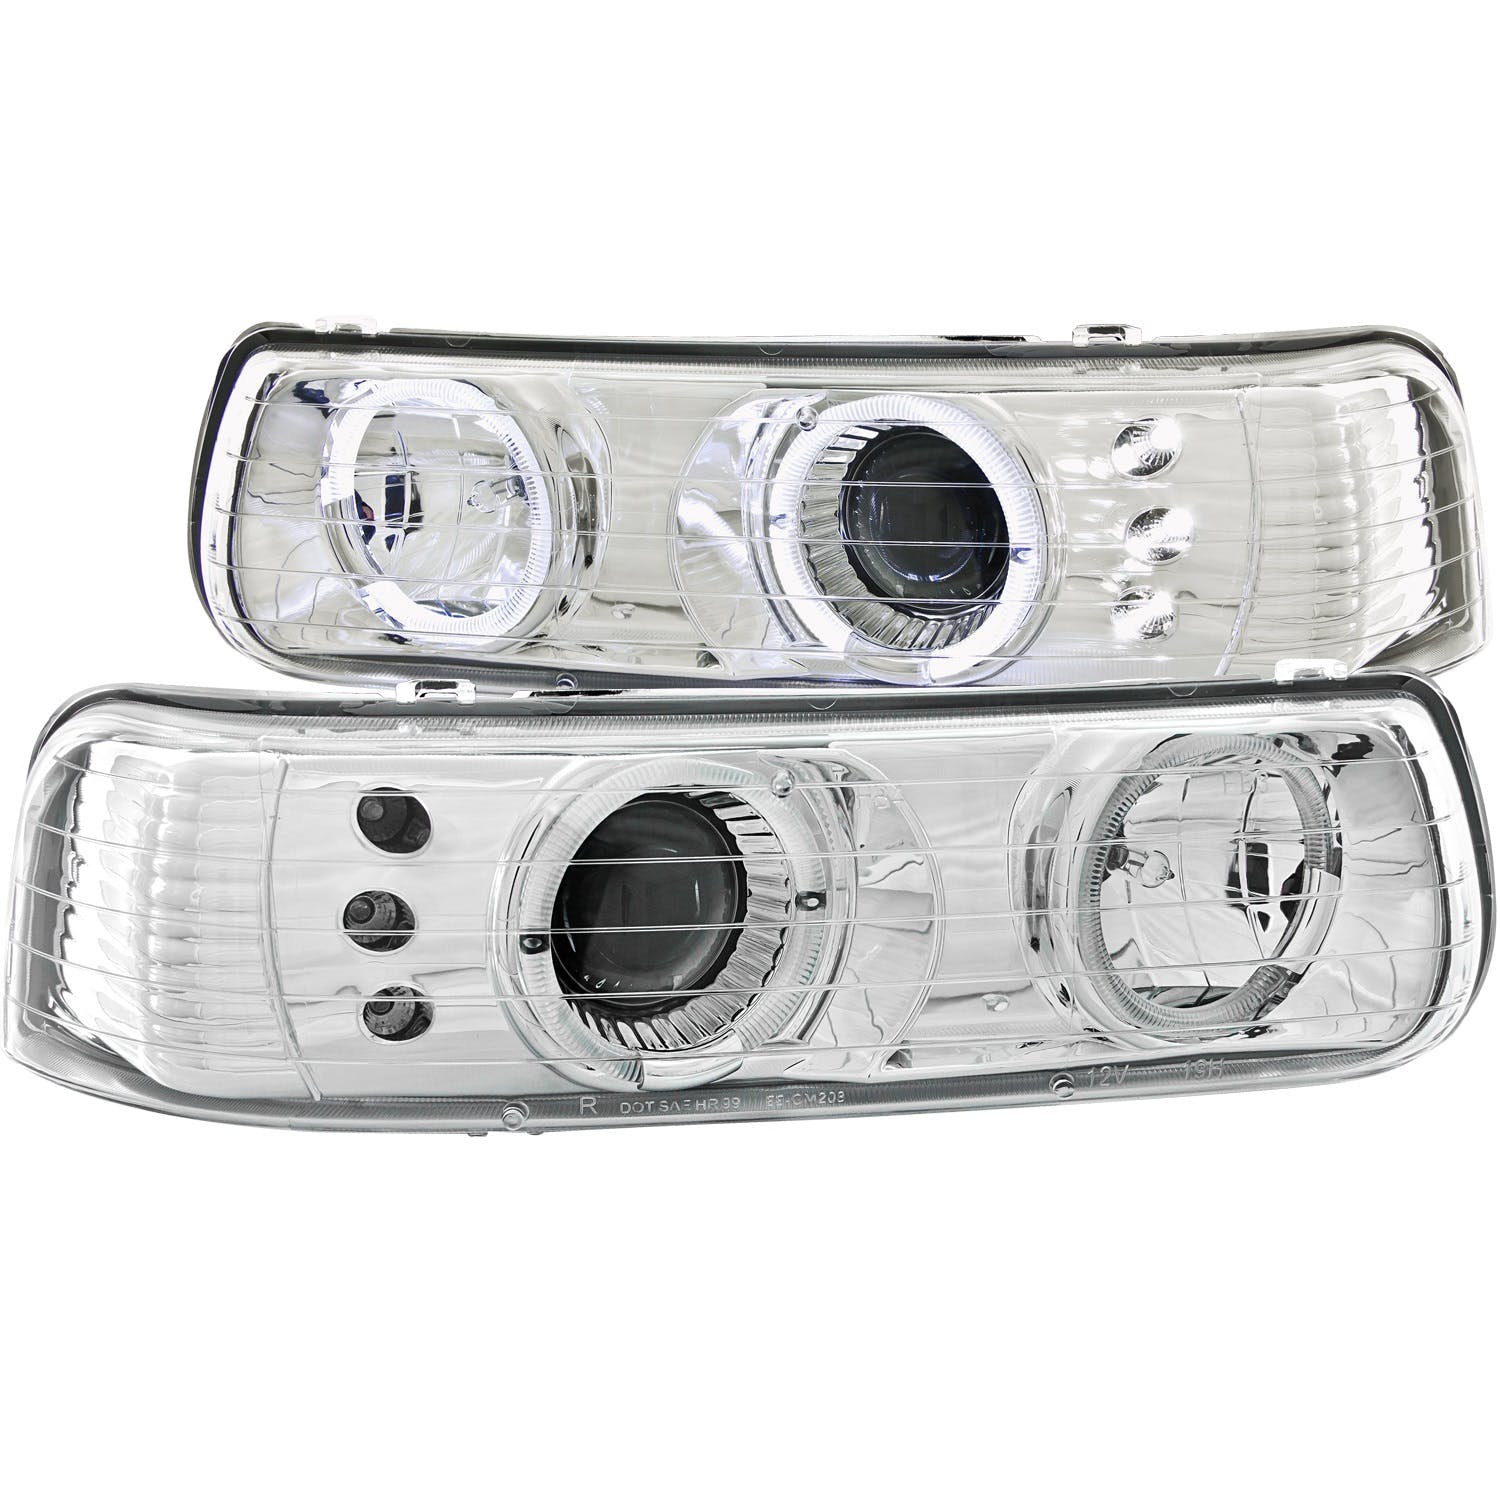 AnzoUSA 111190 Projector Headlights with Halo Chrome